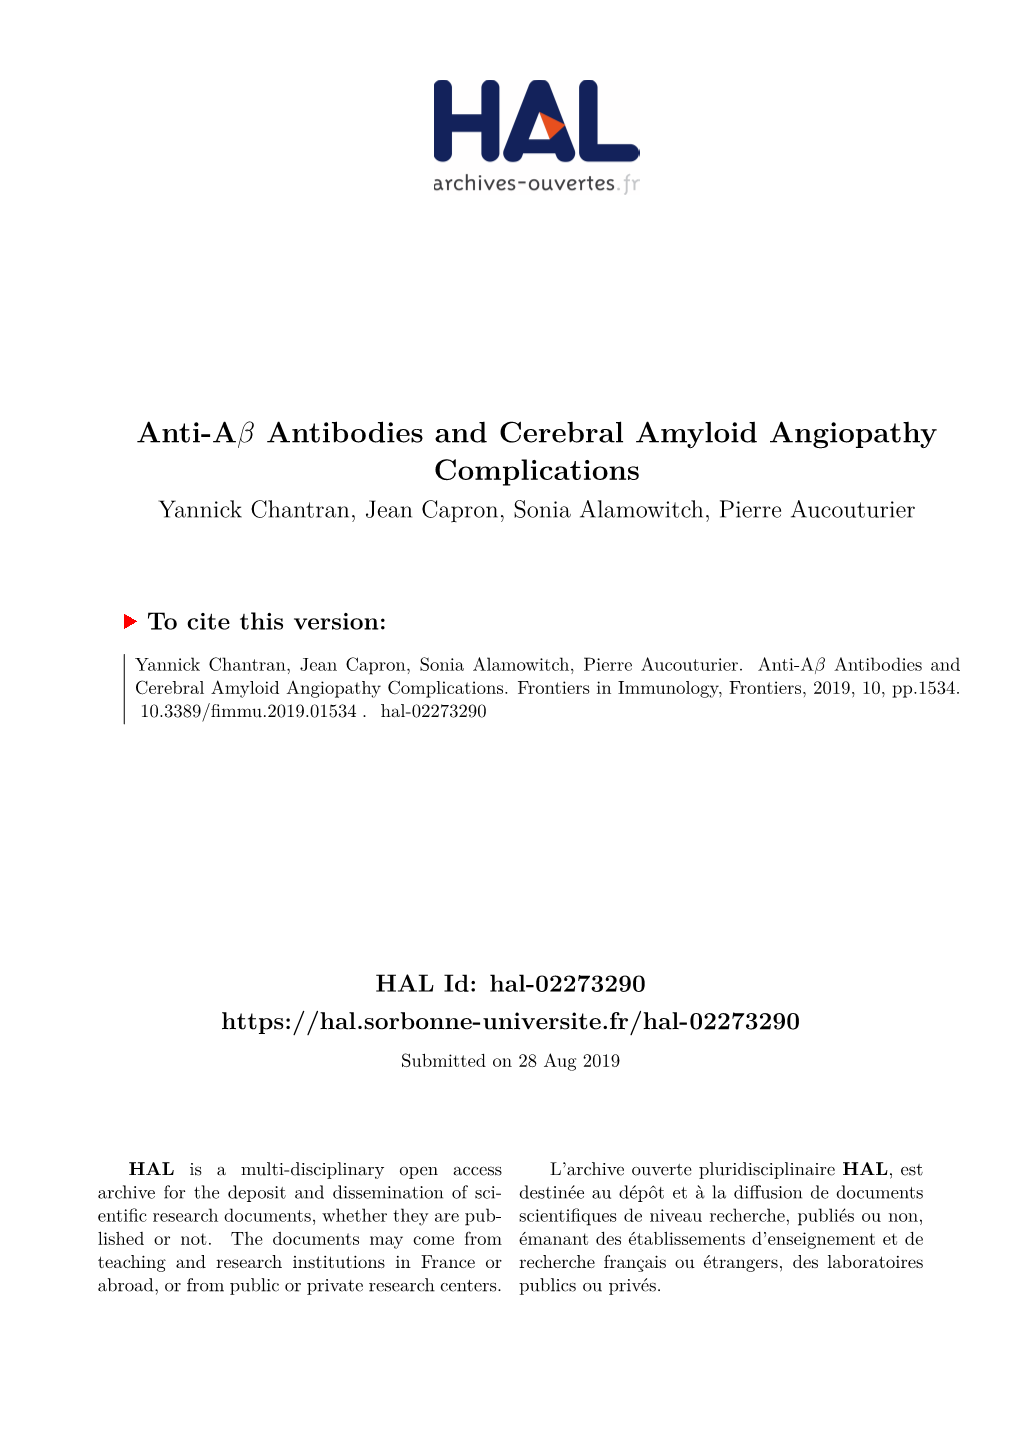 Anti-A Antibodies and Cerebral Amyloid Angiopathy Complications